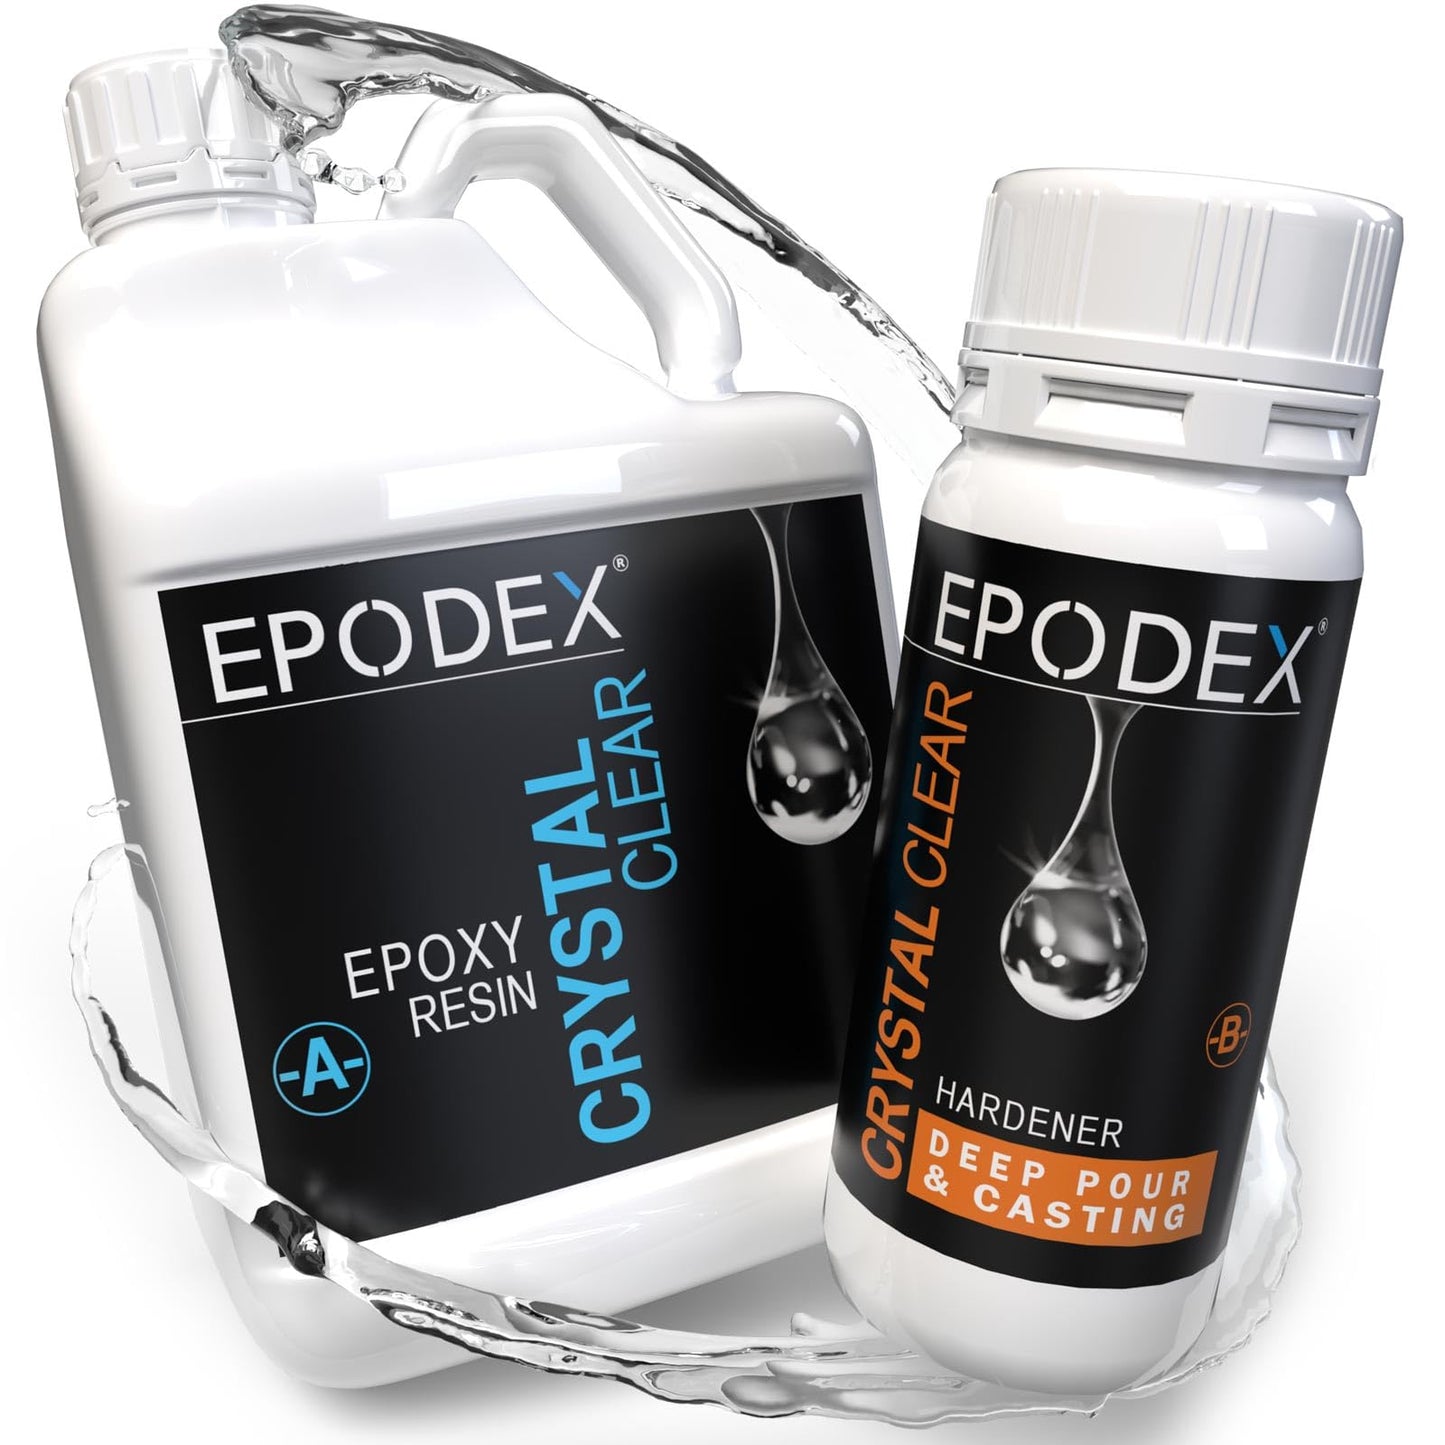 EPODEX® Deep Pour & Casting Epoxy Resin Kit Crystal-Clear & Colored, Solvent-& Bubble-Free, UV-Stabilized, Low Odor, Up To 12 Inch, River Table, Deep Cast Art & Craft, Live Edge, Wood 0.375-15 Gal 2:1